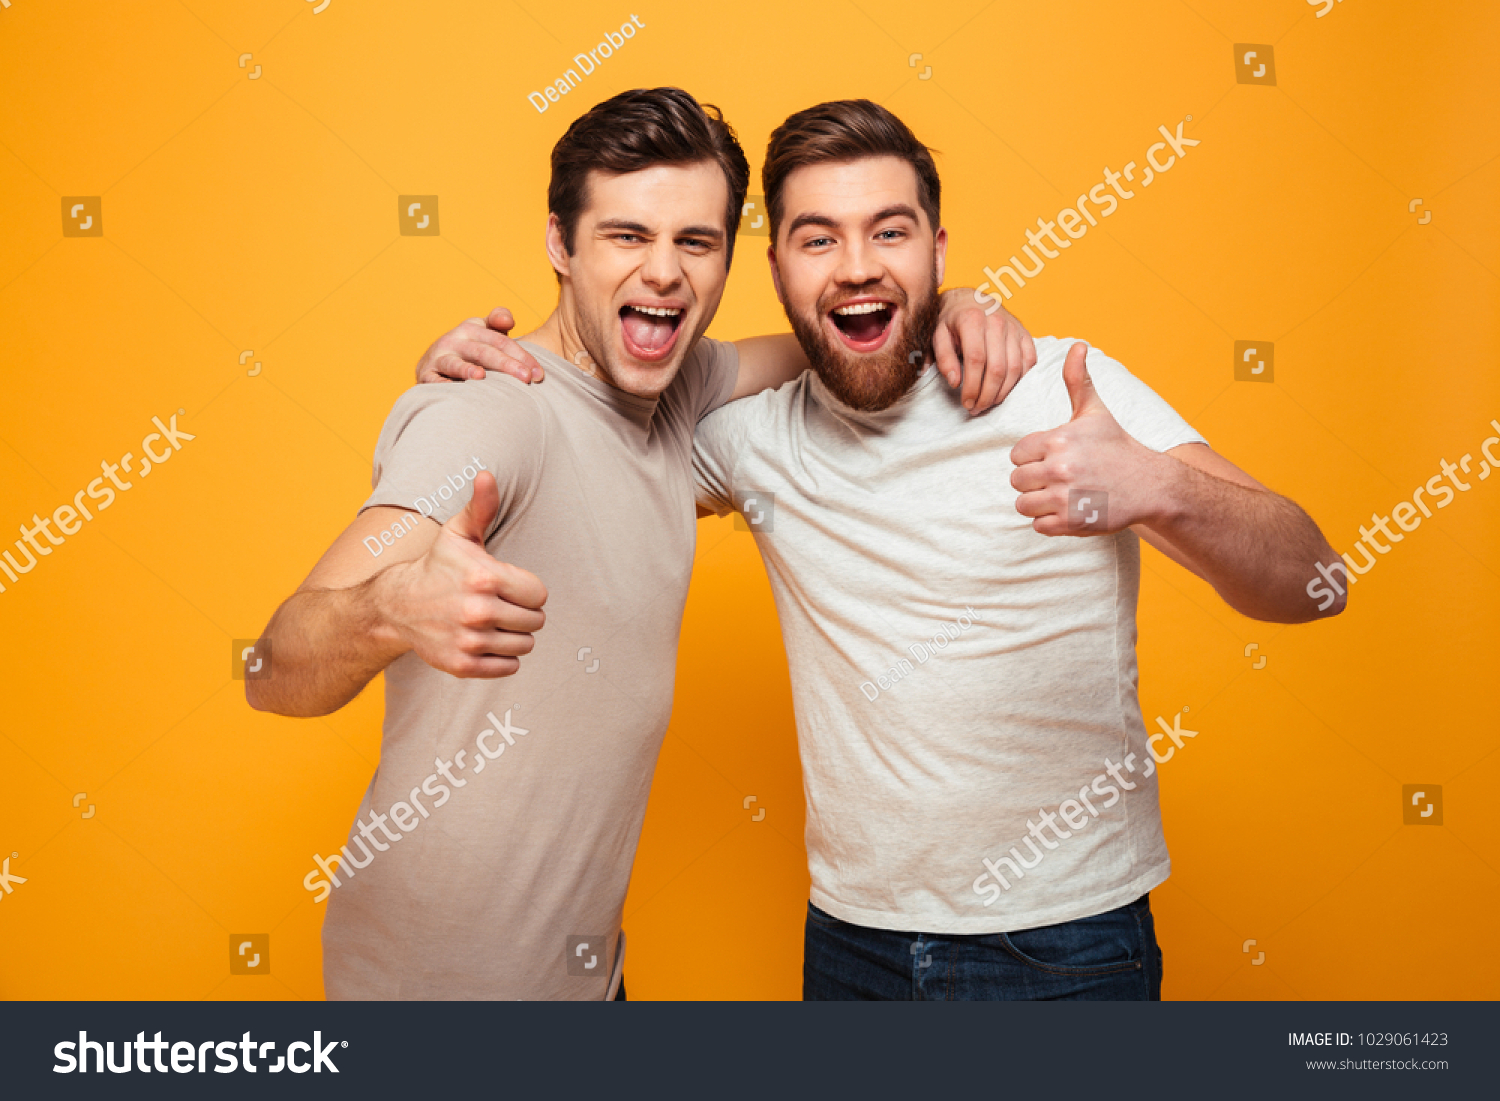 Portrait of a two happy young men showing thumbs up isolated over yellow background #1029061423